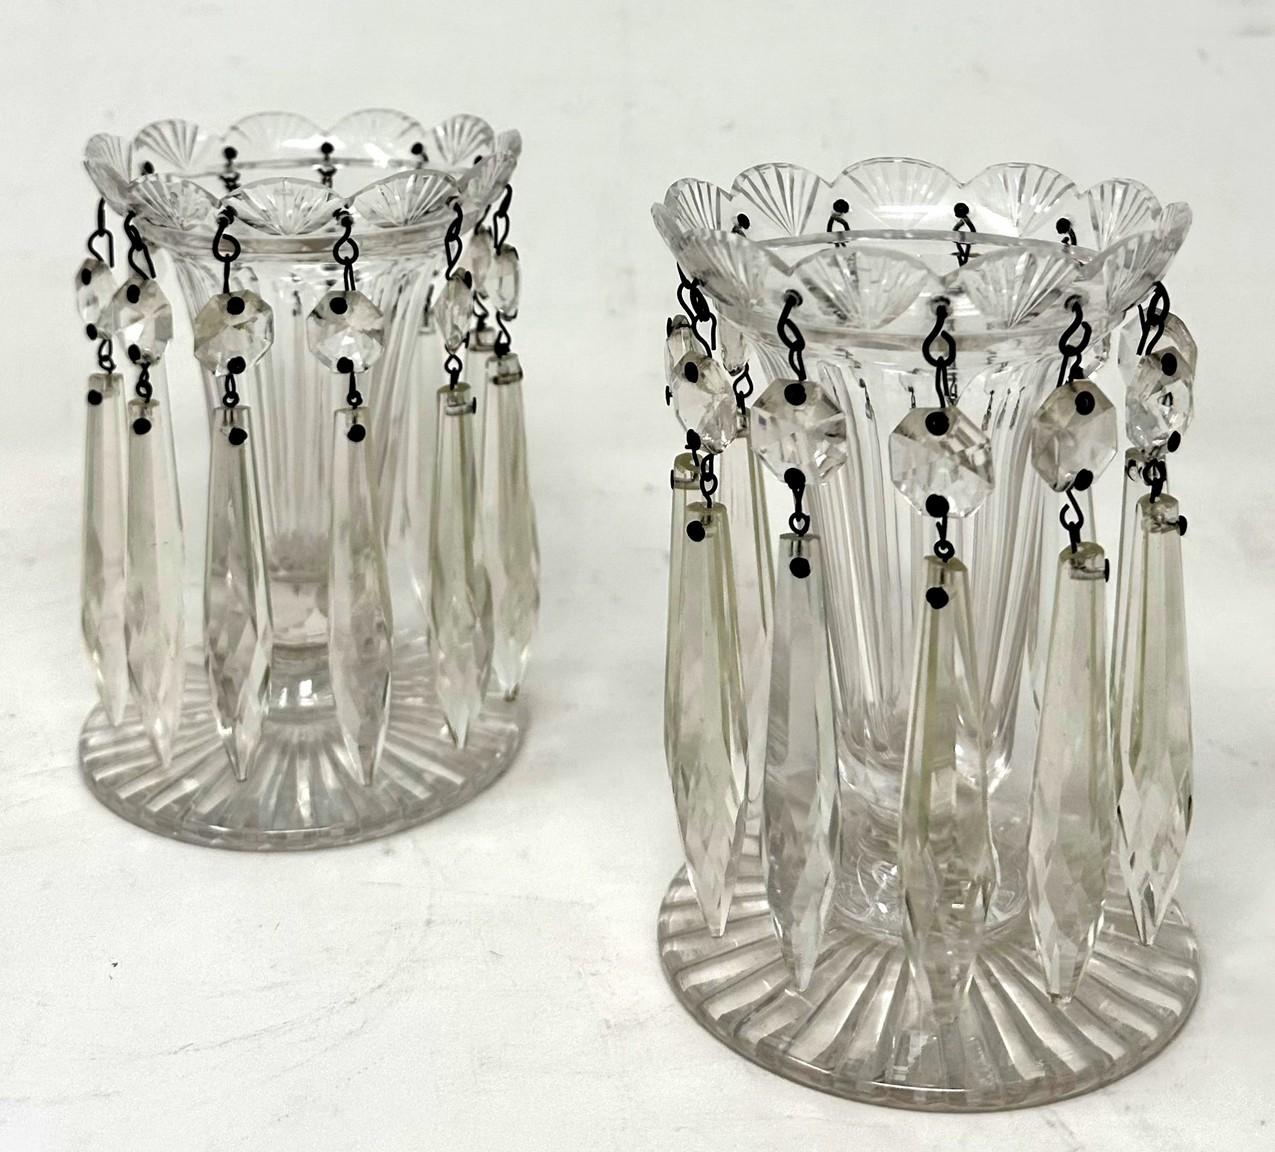 A Stylish Example of a Fine Pair of Hand Cut Full Lead Crystal Lusters of outstanding heavy gauge quality and seldom seen small proportions, just over five inches tall, possibly made by in Ireland by the World-famous Irish Glass Company Waterford